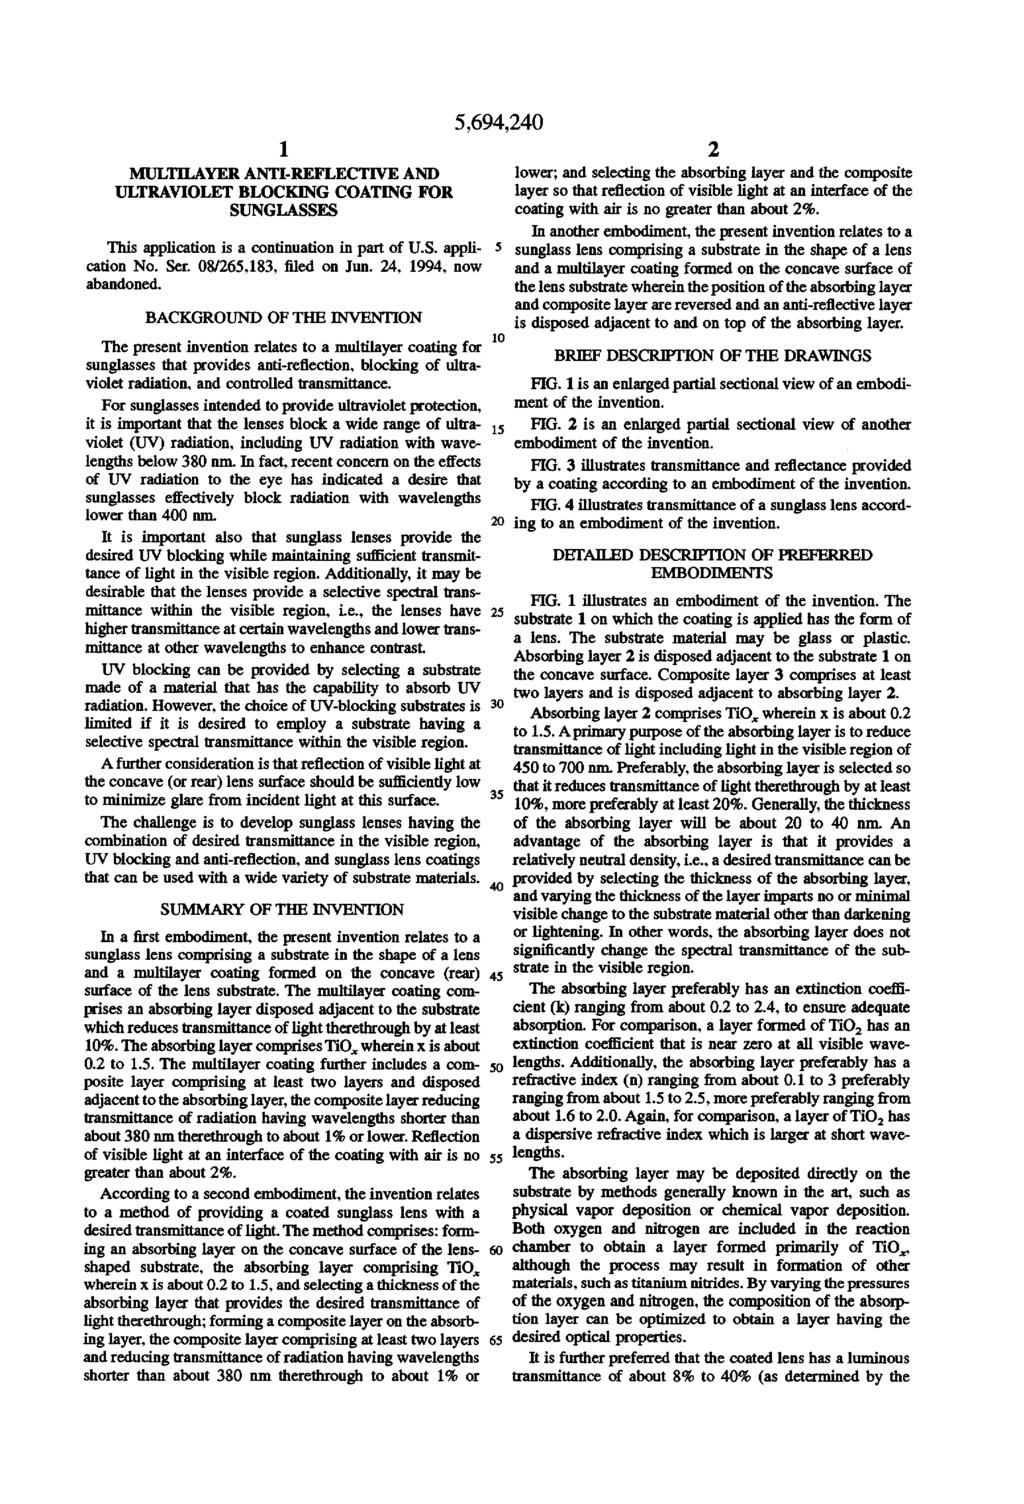 1. MULTLAYER ANT-REFLECTIVE AND ULTRAWOLET BLOCKING COATING FOR SUNGLASSES This application is a continuation in part of U.S. appli cation No. Ser. 08/265,183, filed on Jun. 24, 1994, now abandoned.